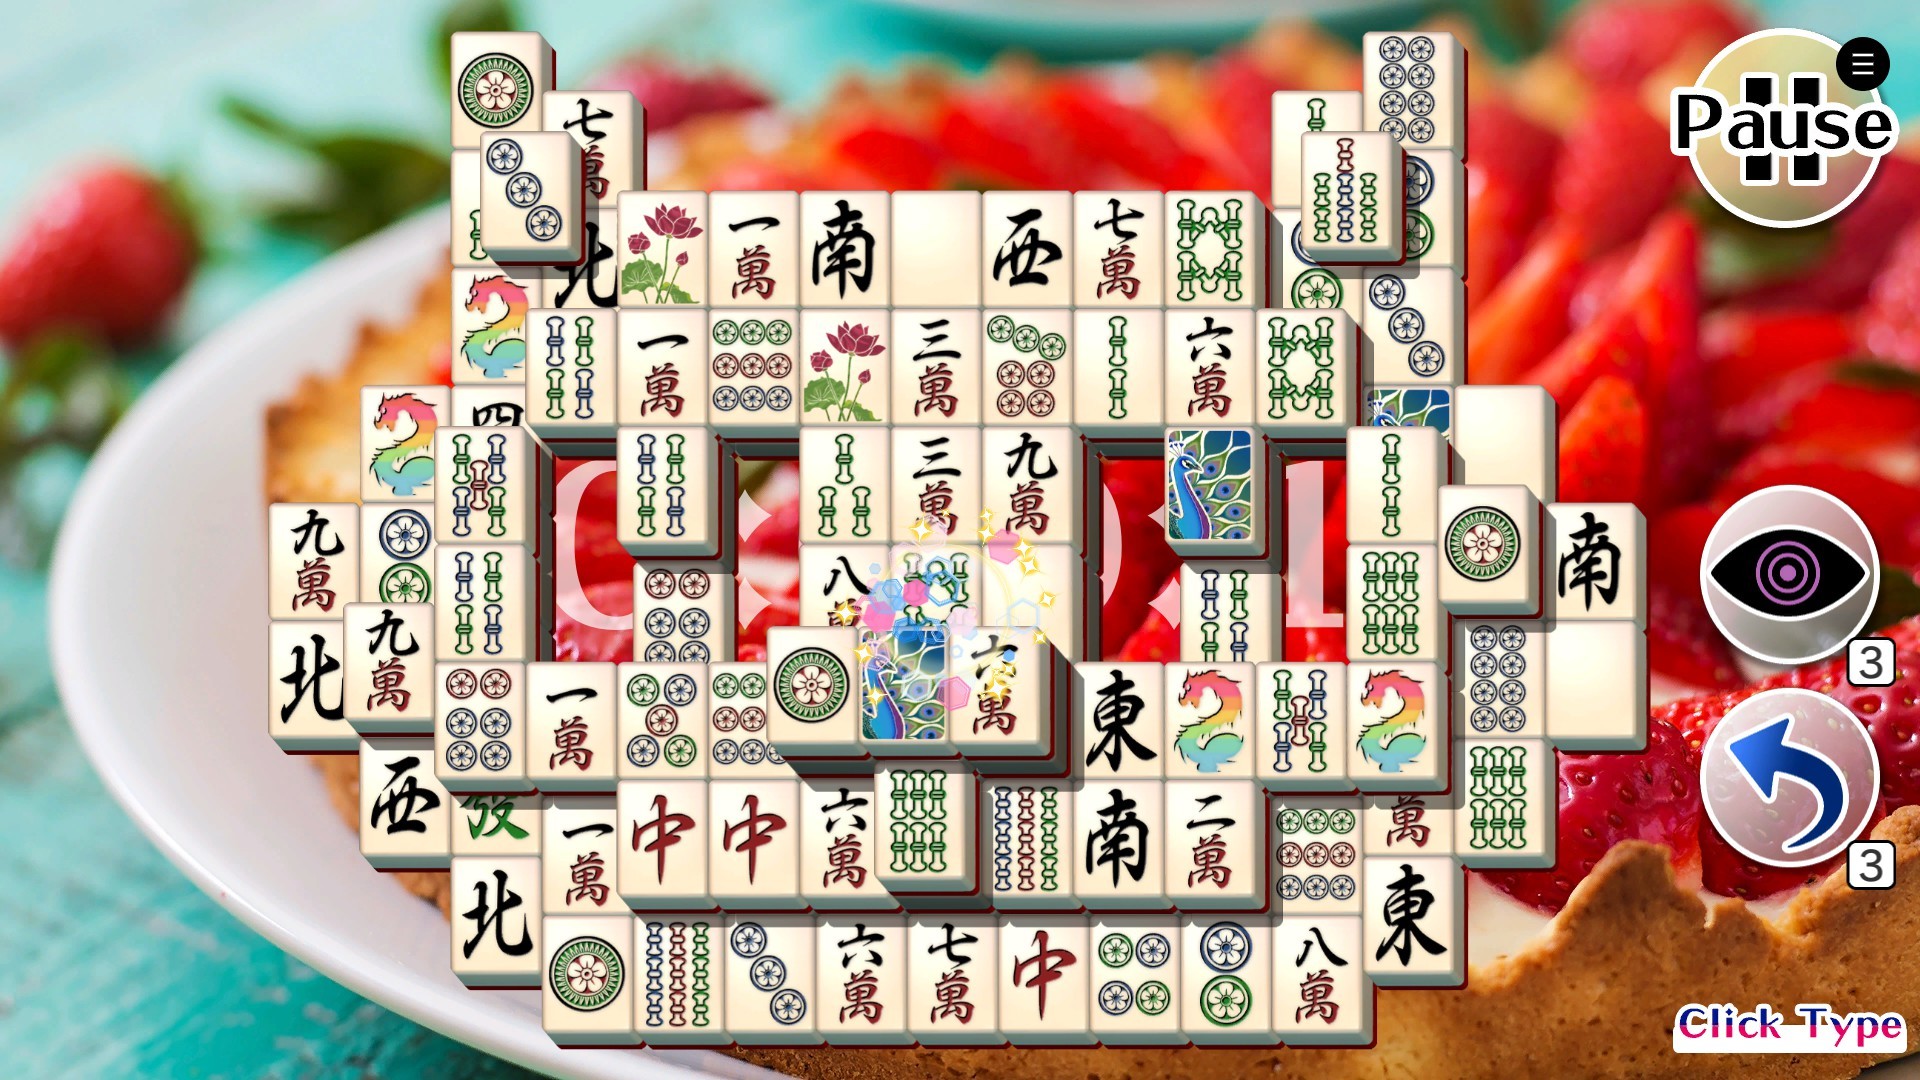 Save 83% on Fantasy Mahjong connect on Steam